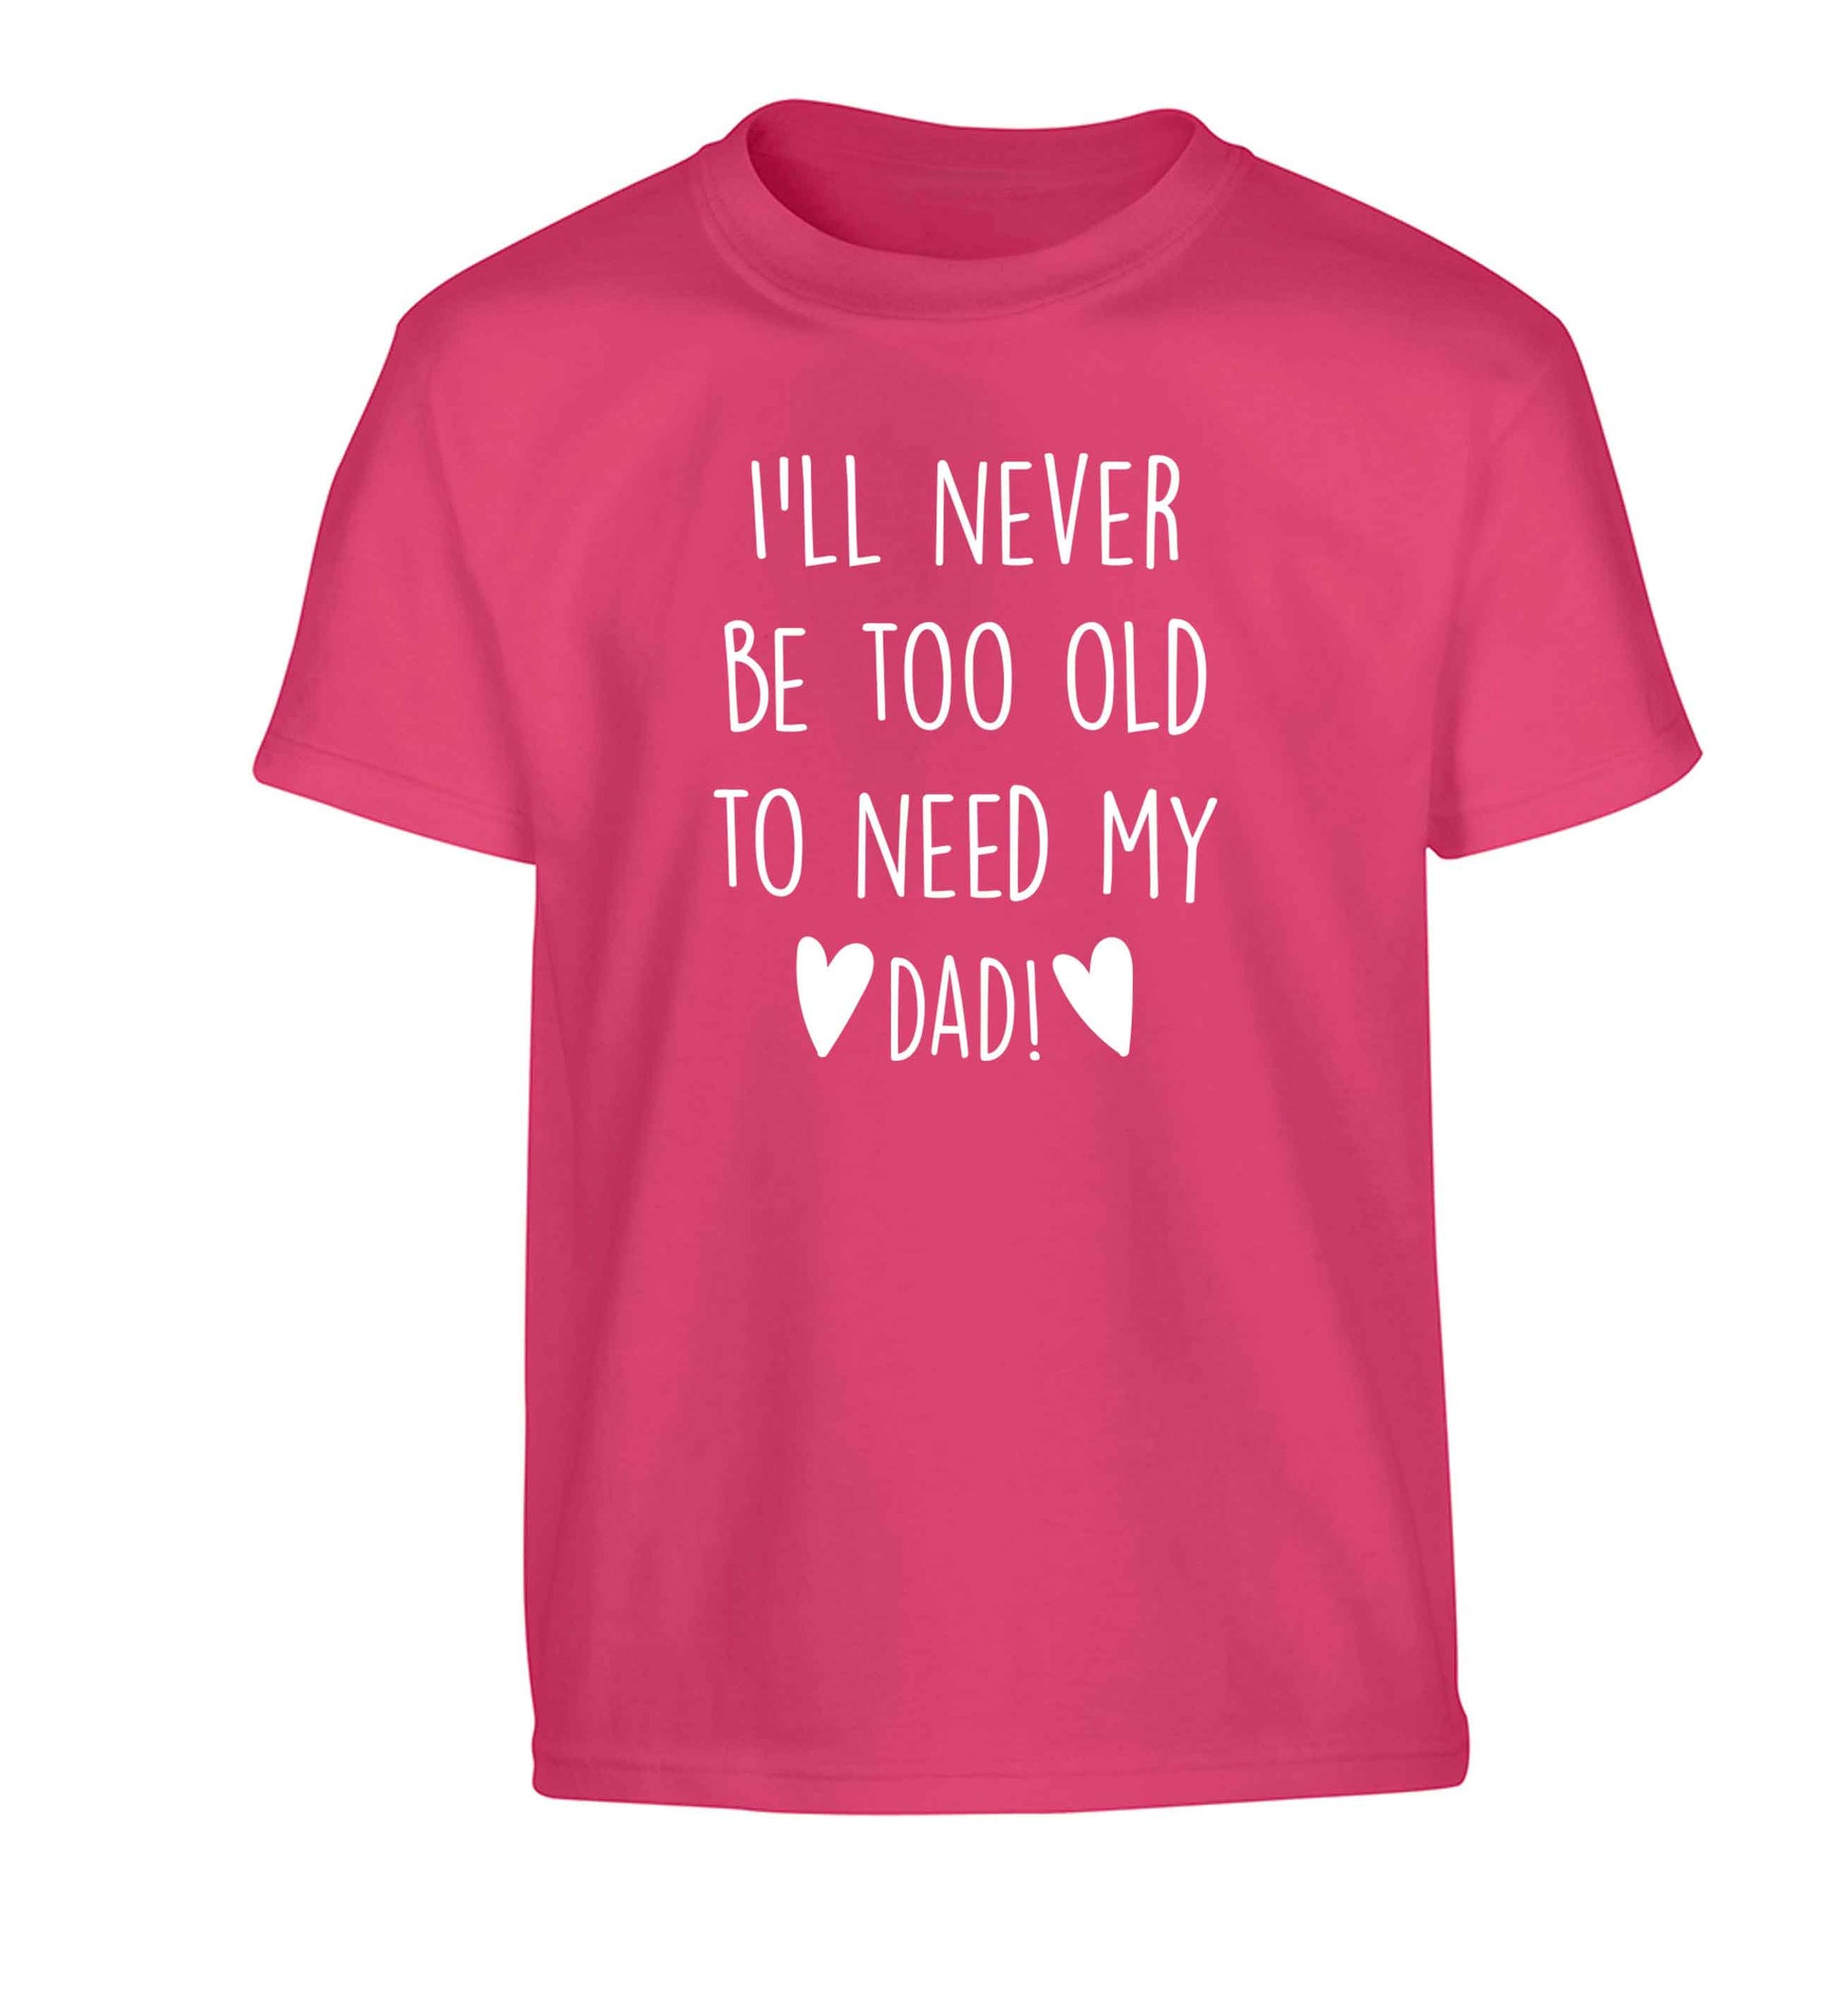 I'll never be too old to need my dad Children's pink Tshirt 12-13 Years